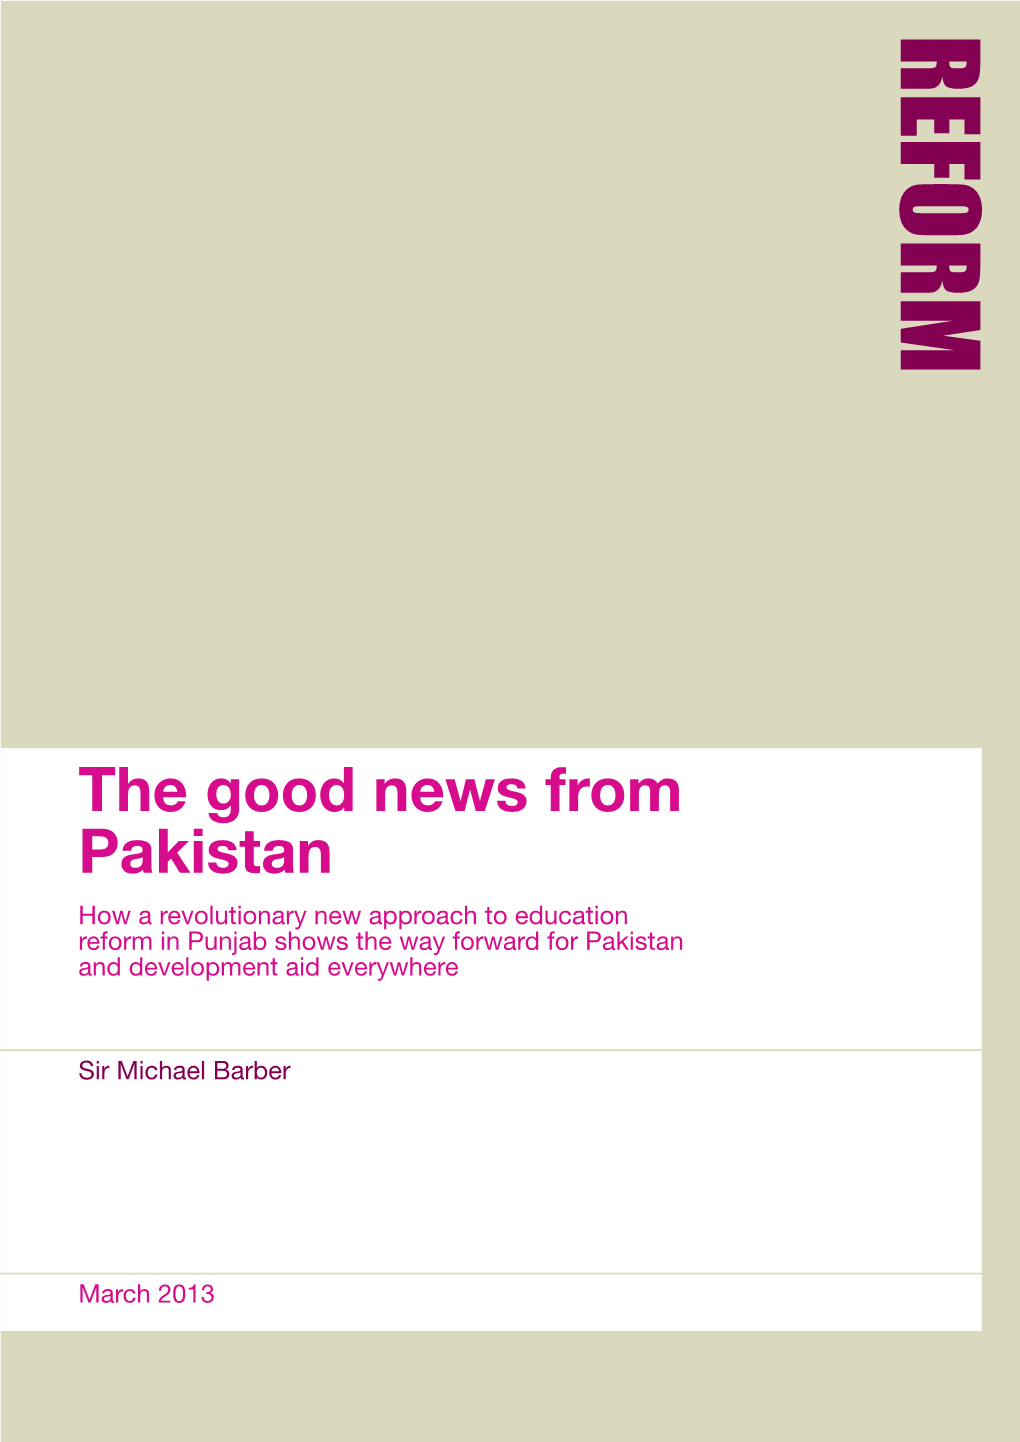 The Good News from Pakistan How a Revolutionary New Approach to Education Reform in Punjab Shows the Way Forward for Pakistan and Development Aid Everywhere